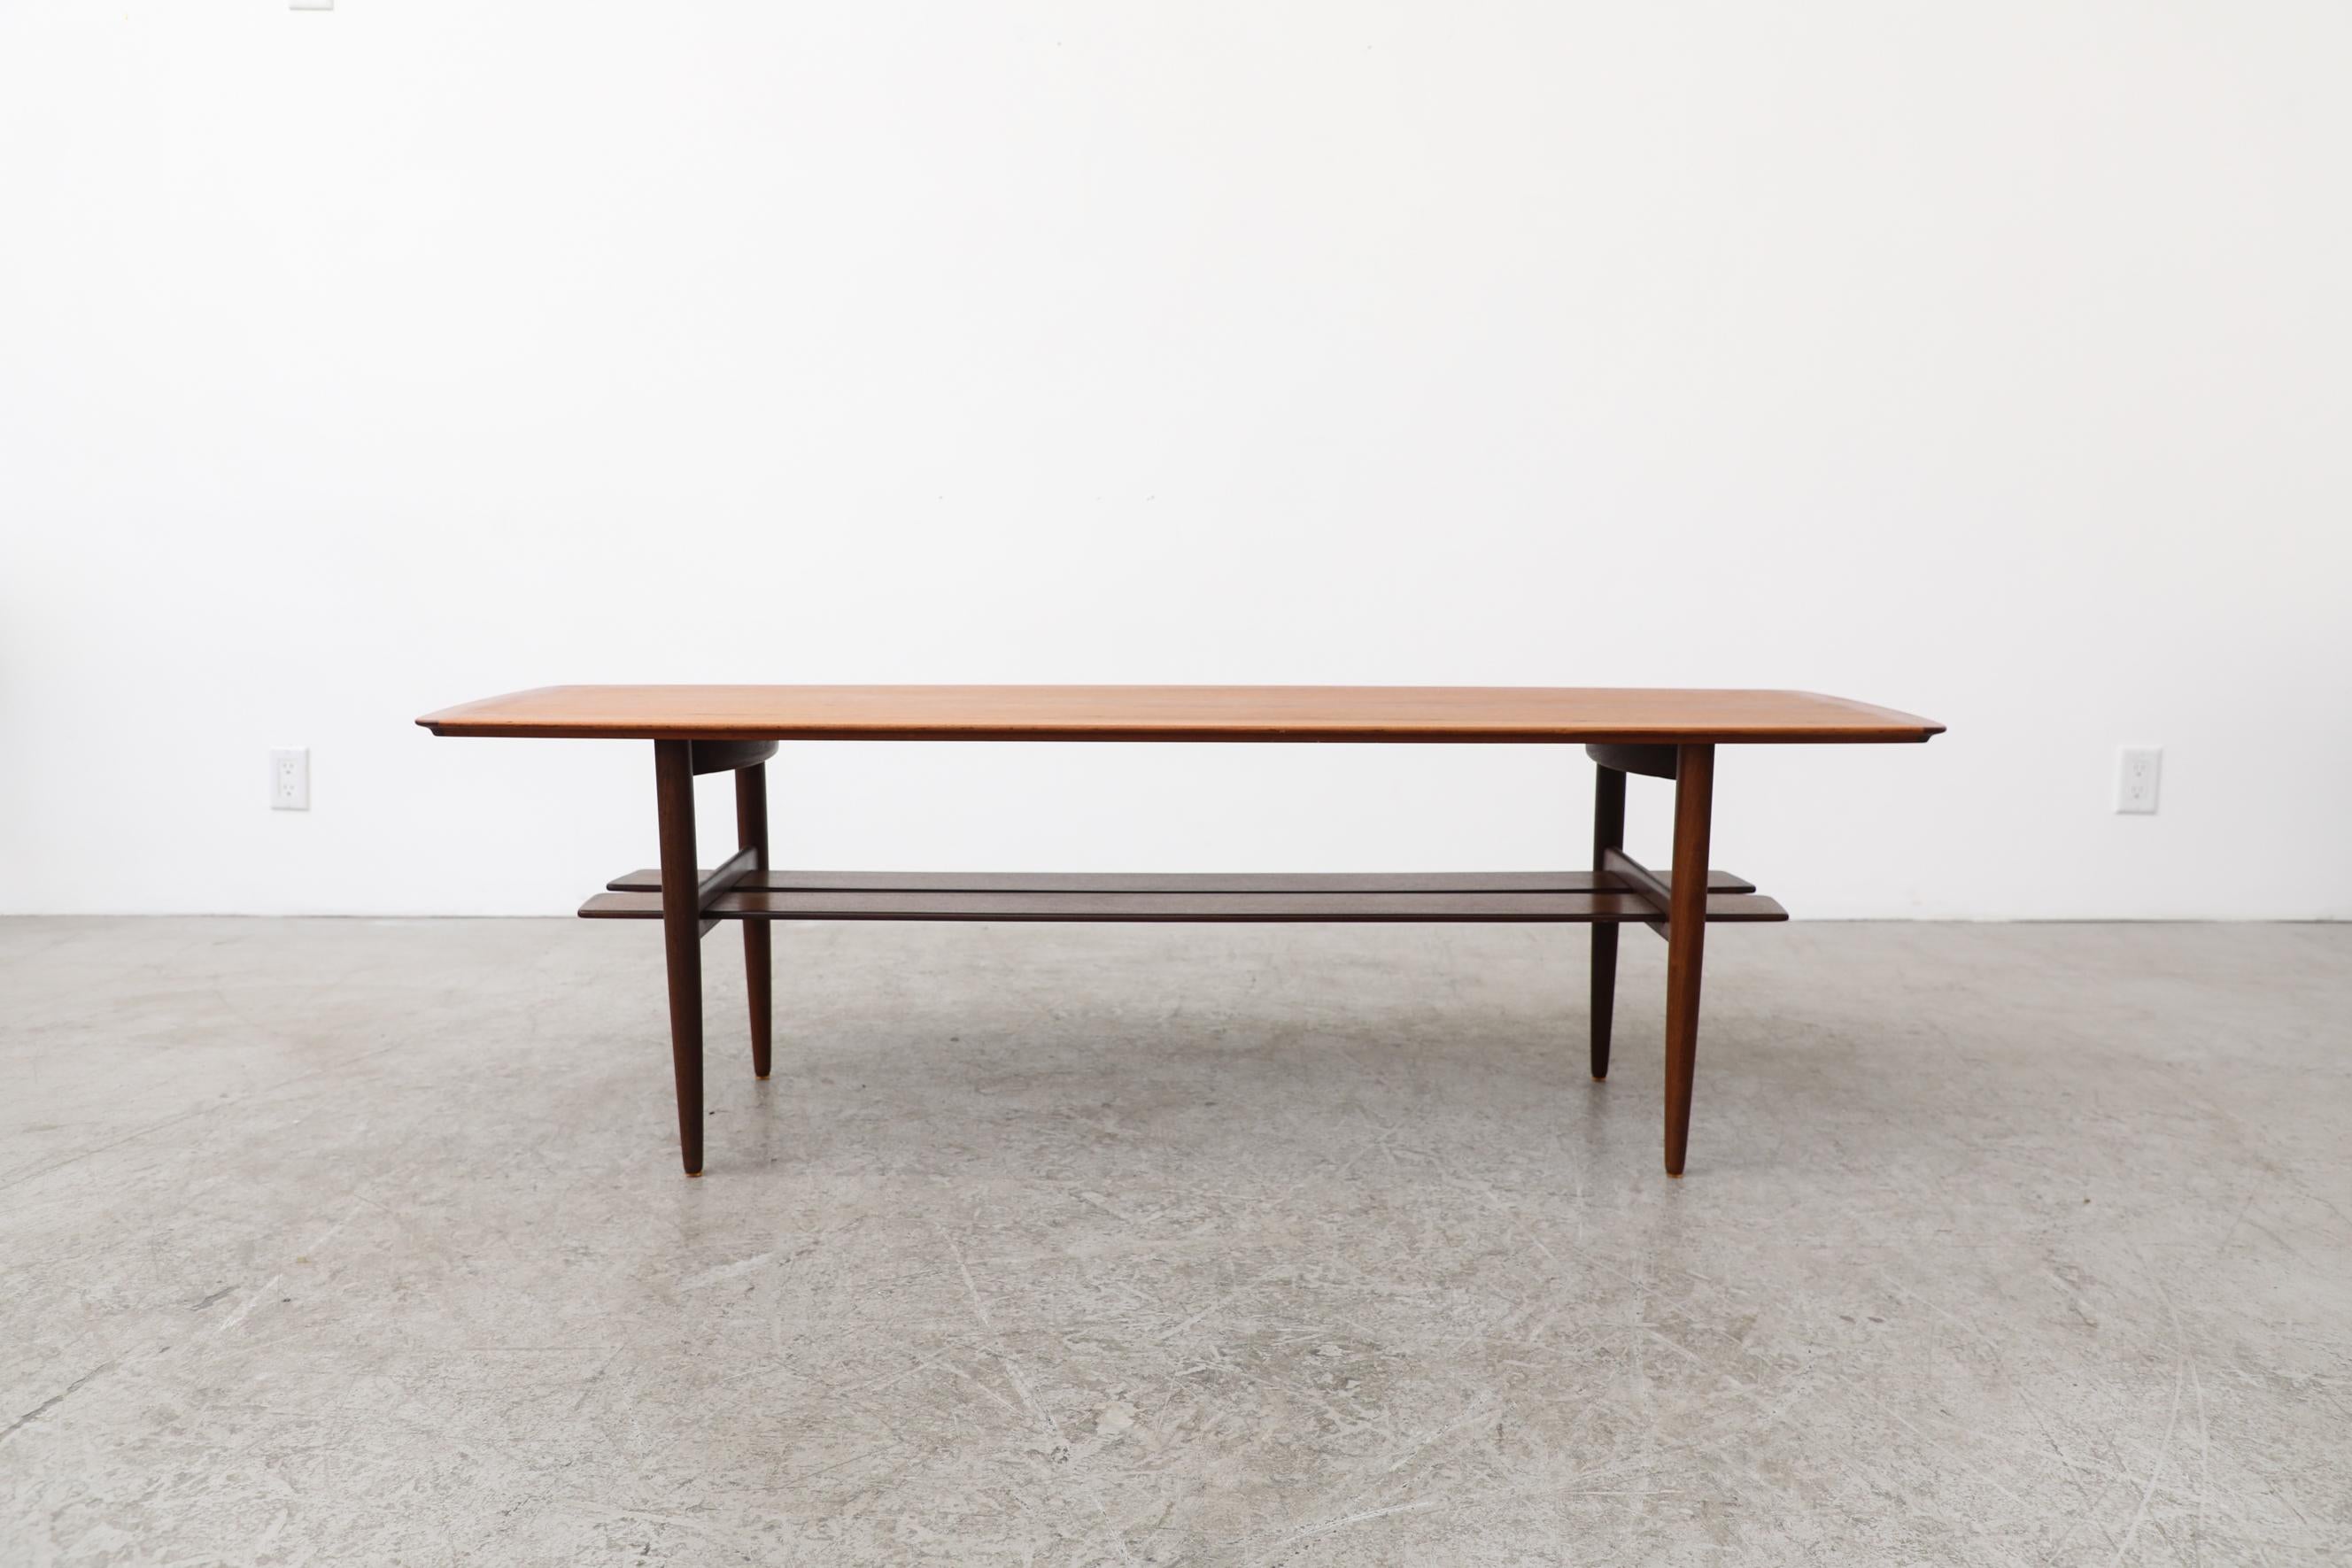 Mid-Century modernist tall coffee table designed by Johannes Andersen with interesting split plank lower magazine shelf. Each side of the lower shelf has a darker stained banner around the edges. It's in original condition with visible wear